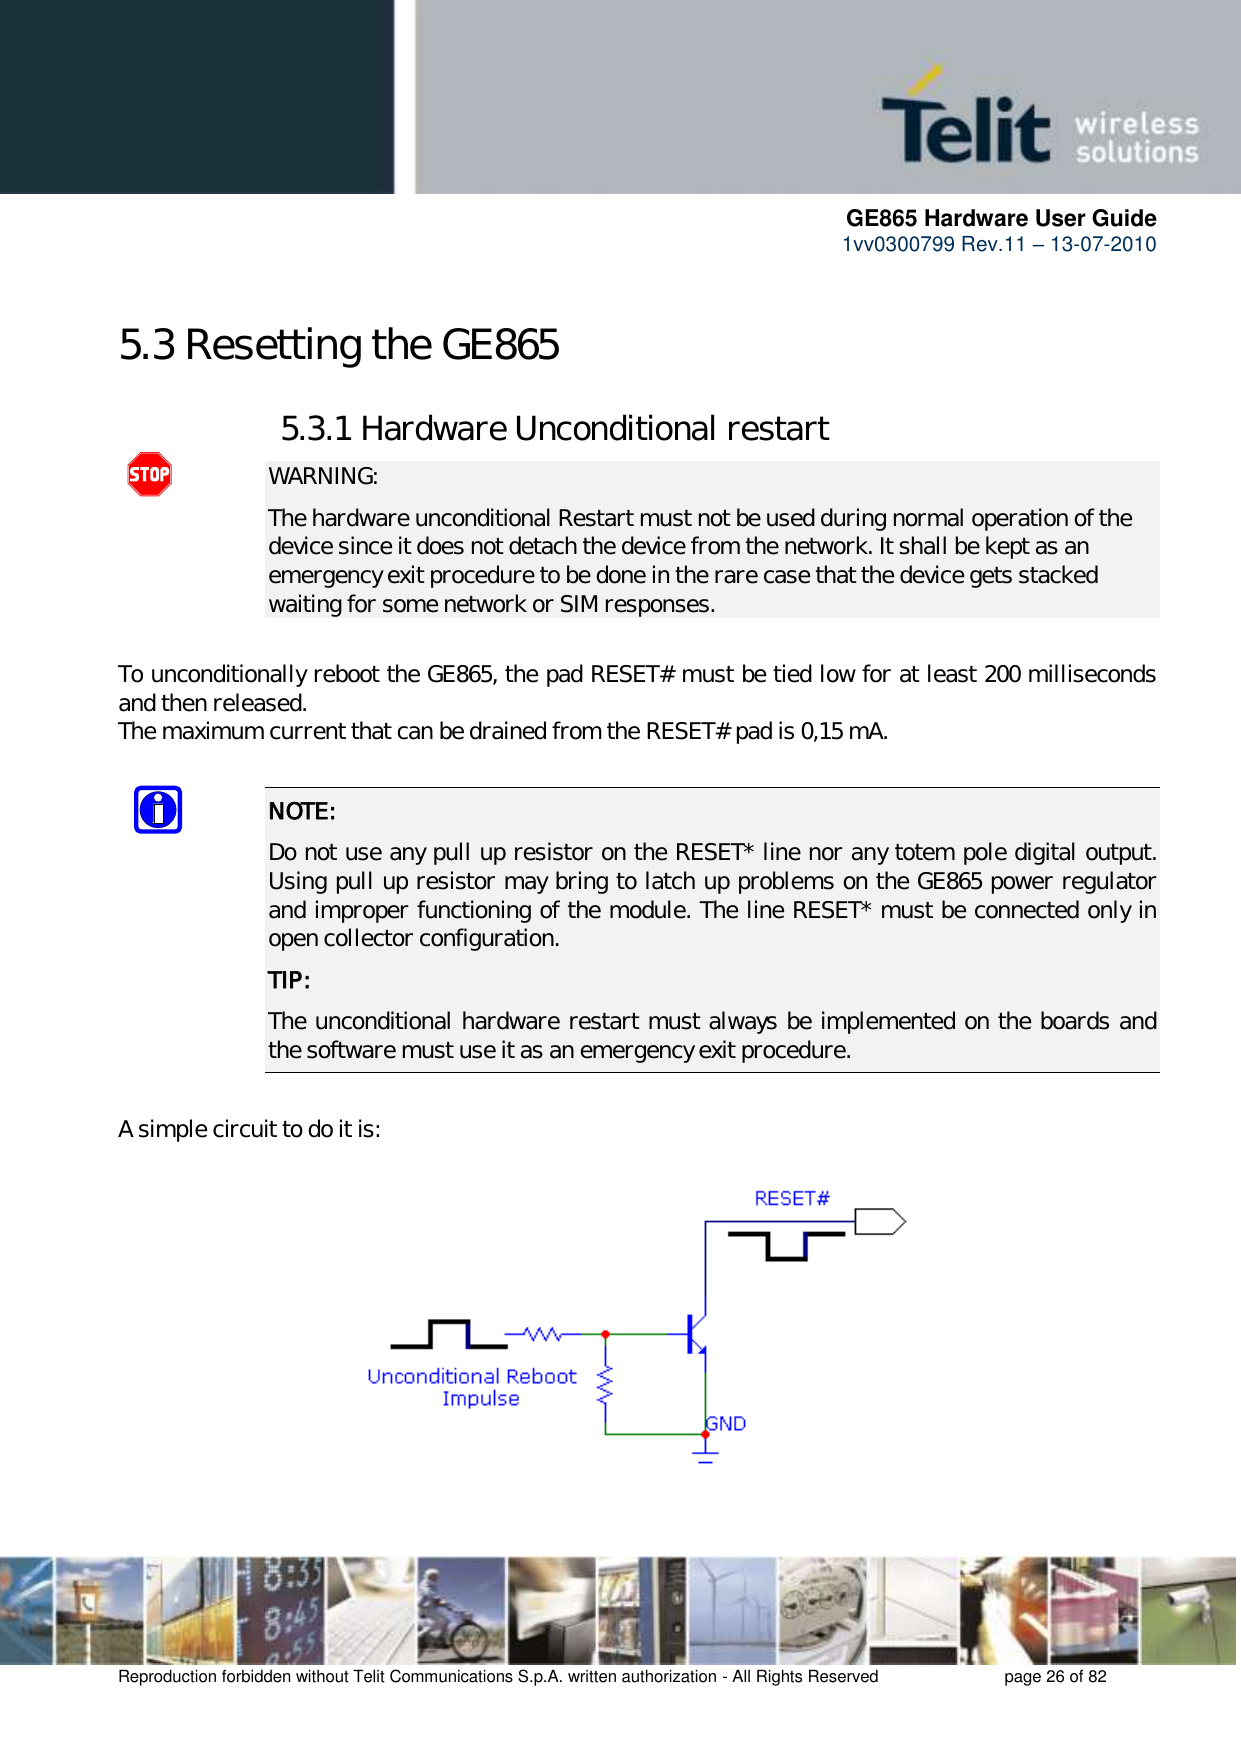      GE865 Hardware User Guide 1vv0300799 Rev.11 – 13-07-2010       Reproduction forbidden without Telit Communications S.p.A. written authorization - All Rights Reserved    page 26 of 82  5.3 Resetting the GE865 5.3.1 Hardware Unconditional restart  WARNING: The hardware unconditional Restart must not be used during normal operation of the device since it does not detach the device from the network. It shall be kept as an emergency exit procedure to be done in the rare case that the device gets stacked waiting for some network or SIM responses.  To unconditionally reboot the GE865, the pad RESET# must be tied low for at least 200 milliseconds and then released. The maximum current that can be drained from the RESET# pad is 0,15 mA.  NOTE:  Do not use any pull up resistor on the RESET* line nor any totem pole digital output. Using pull up resistor may bring to latch up problems on the GE865 power regulator and improper functioning of the module. The line RESET* must be connected only in open collector configuration. TIP: The unconditional hardware restart must always be implemented on the boards and the software must use it as an emergency exit procedure.  A simple circuit to do it is:    